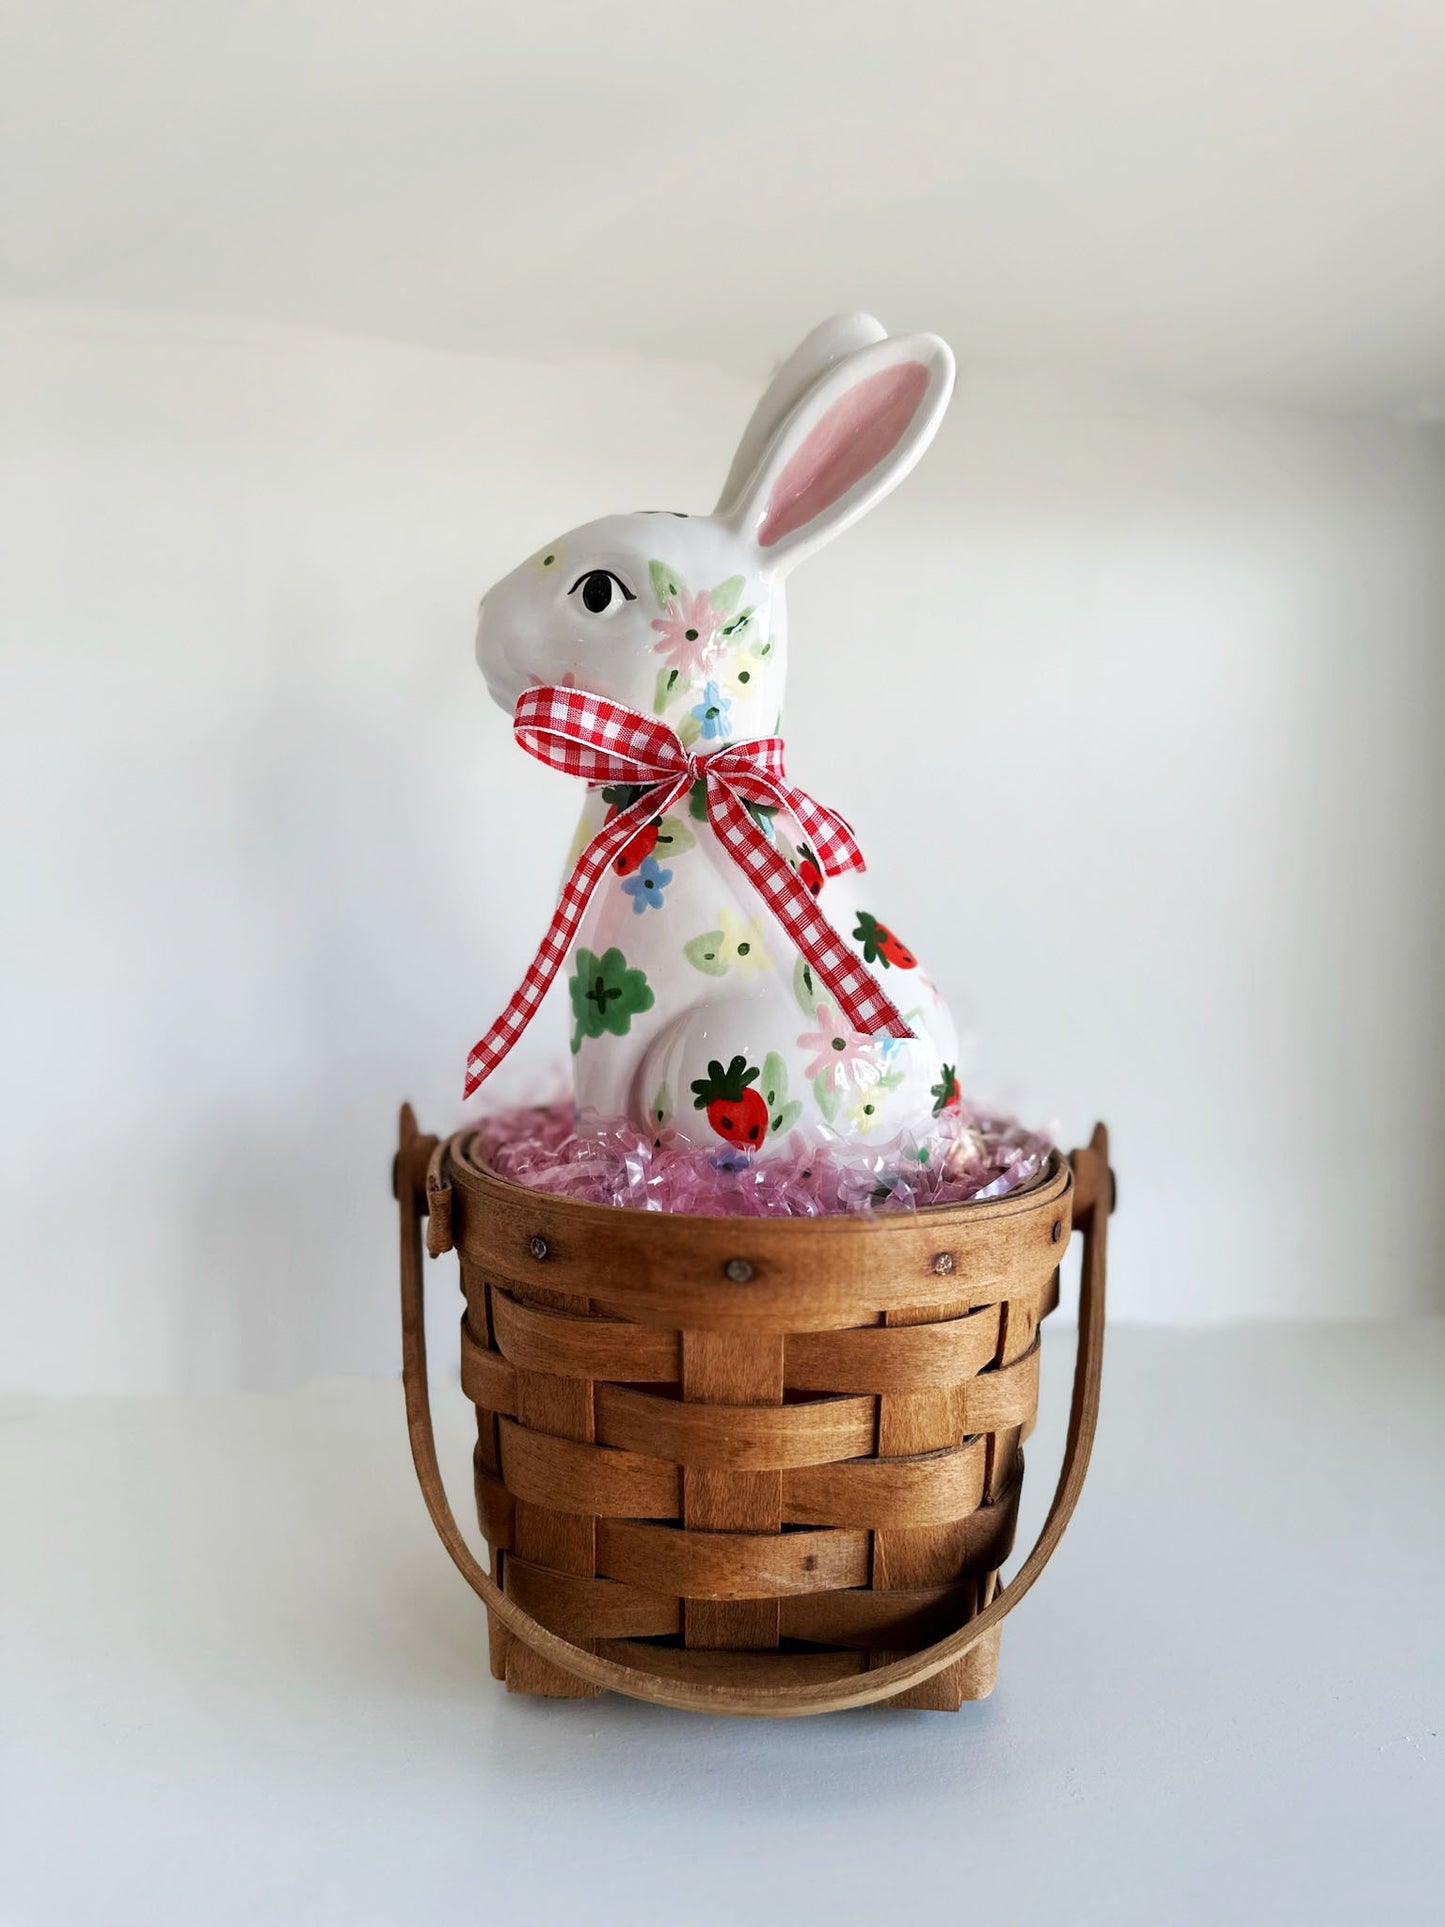 LIMITED! Hand Painted Strawberries and Clover Bunny with 22K Gold Accents